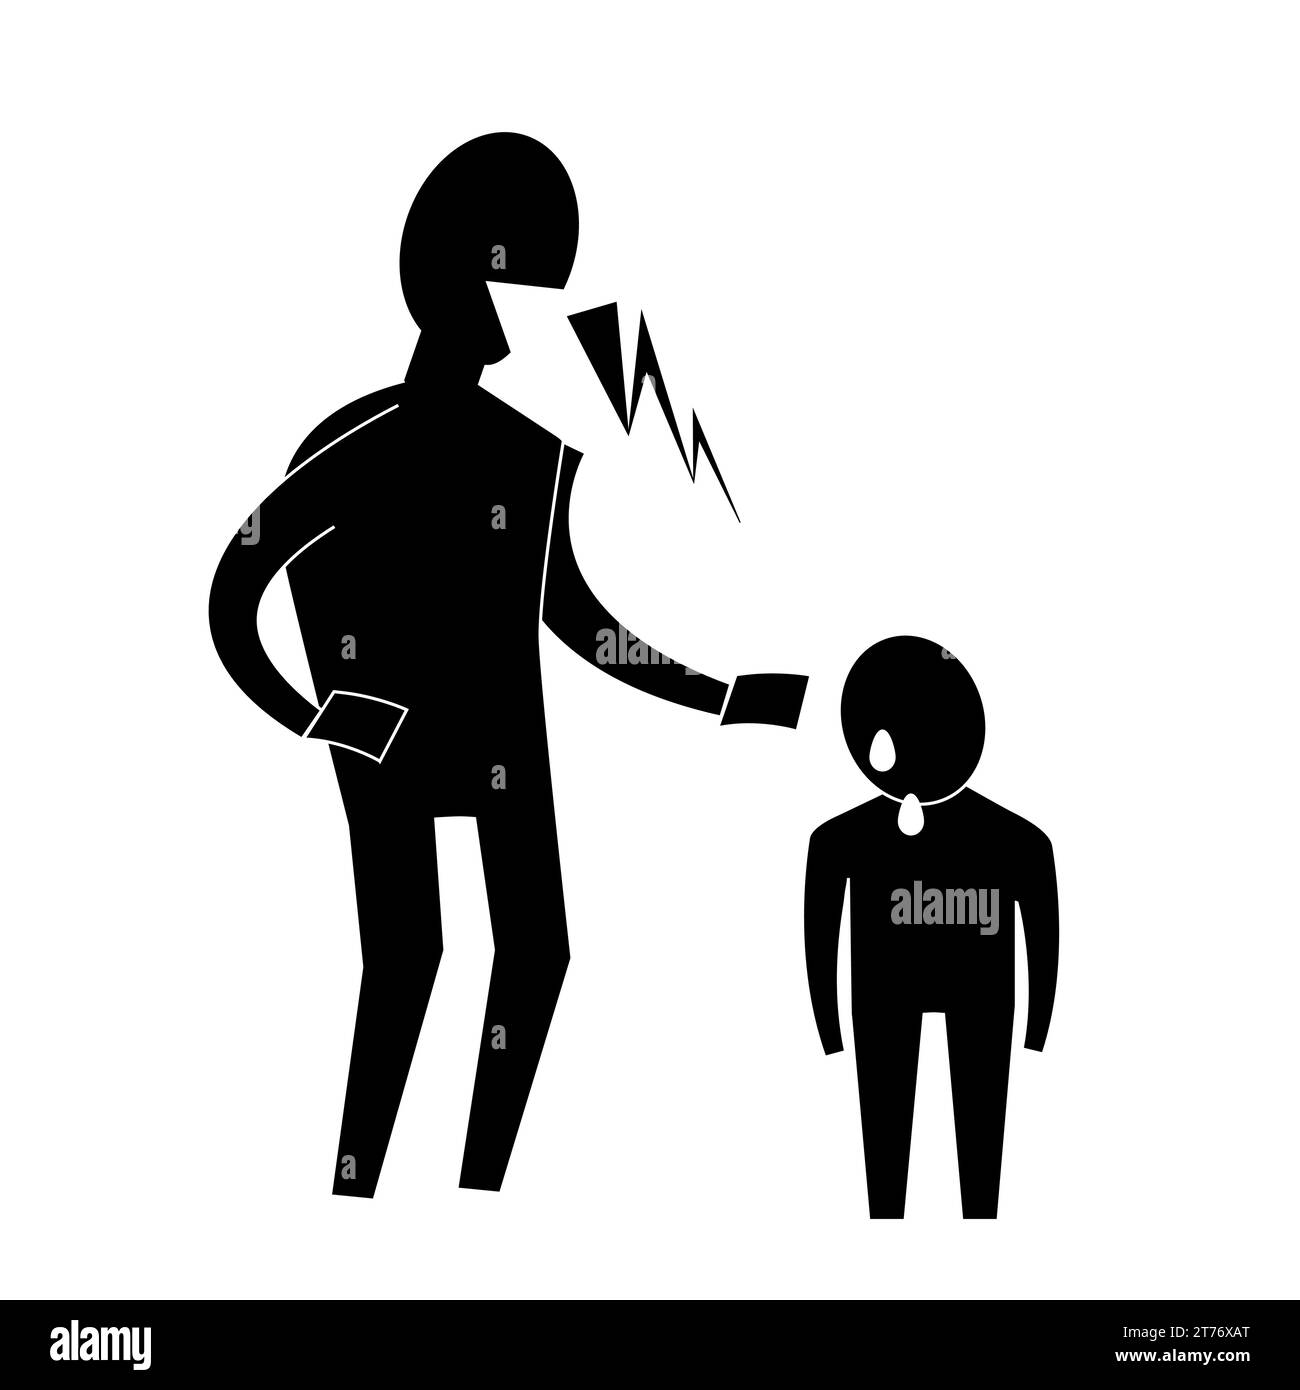 An adult scolds a small child. Icon style, black silhouettes are visible. Graphics on the theme of domestic violence, narcissism and abuse. Stock Vector